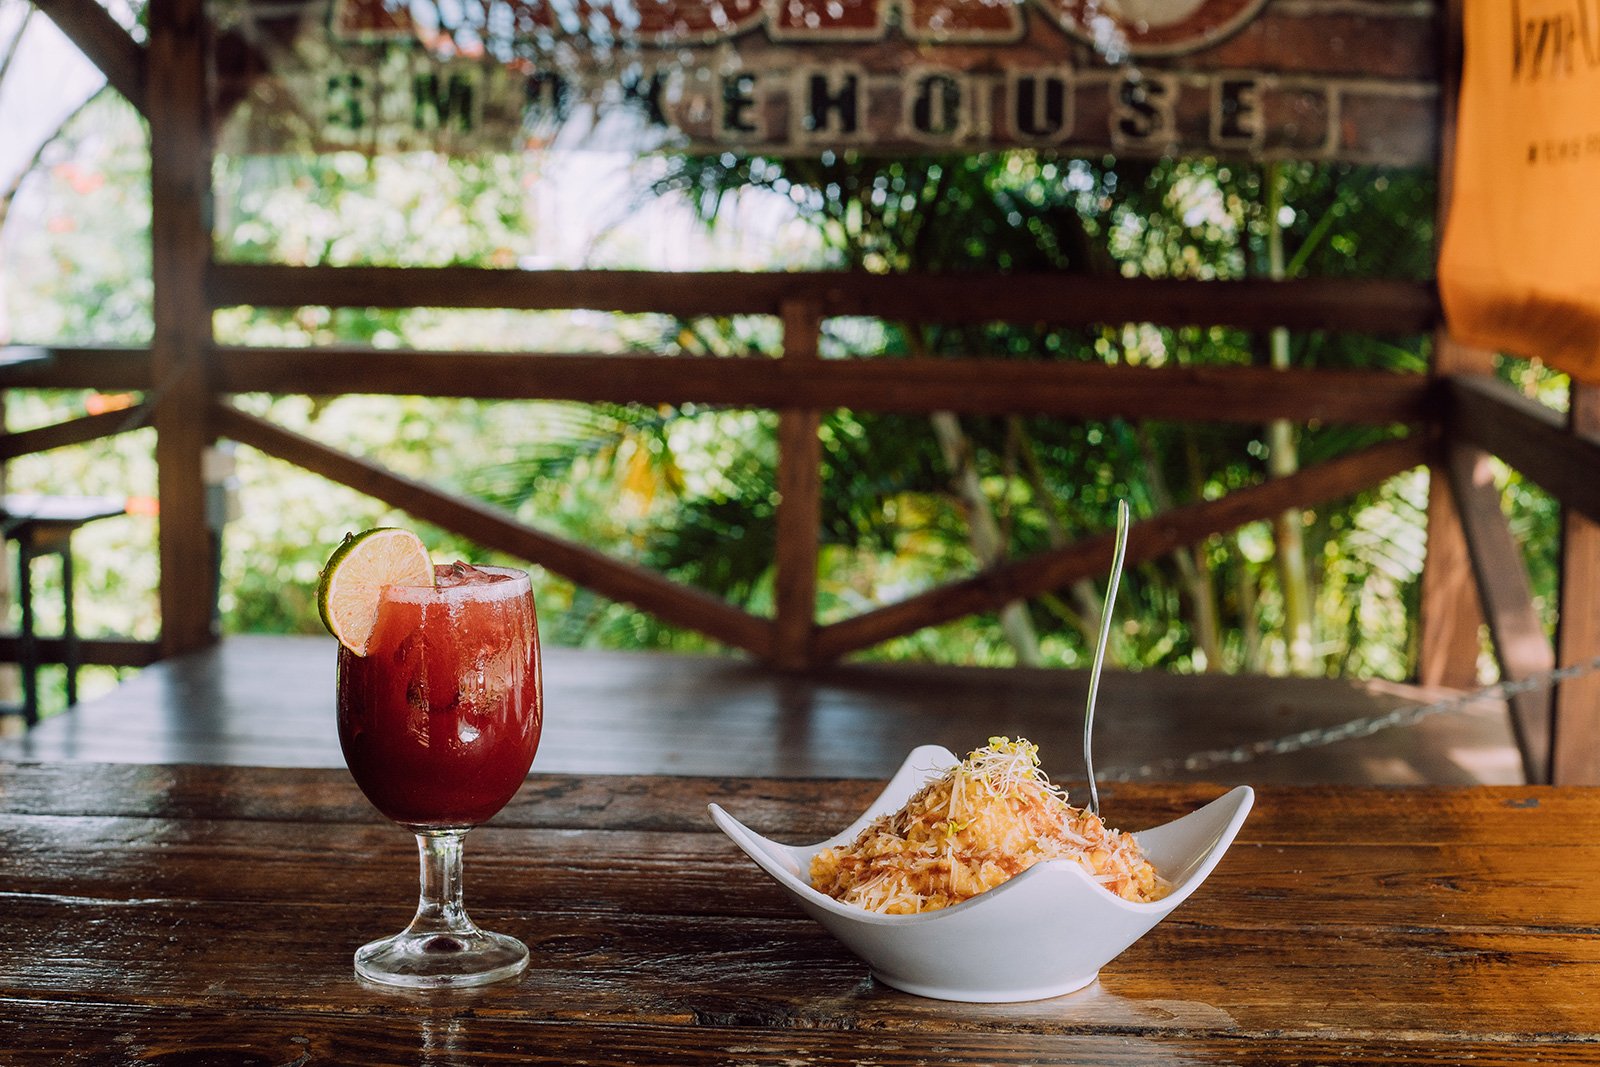 A glass of sangria and creole cuisine at ASAO smokehouse in Ciales